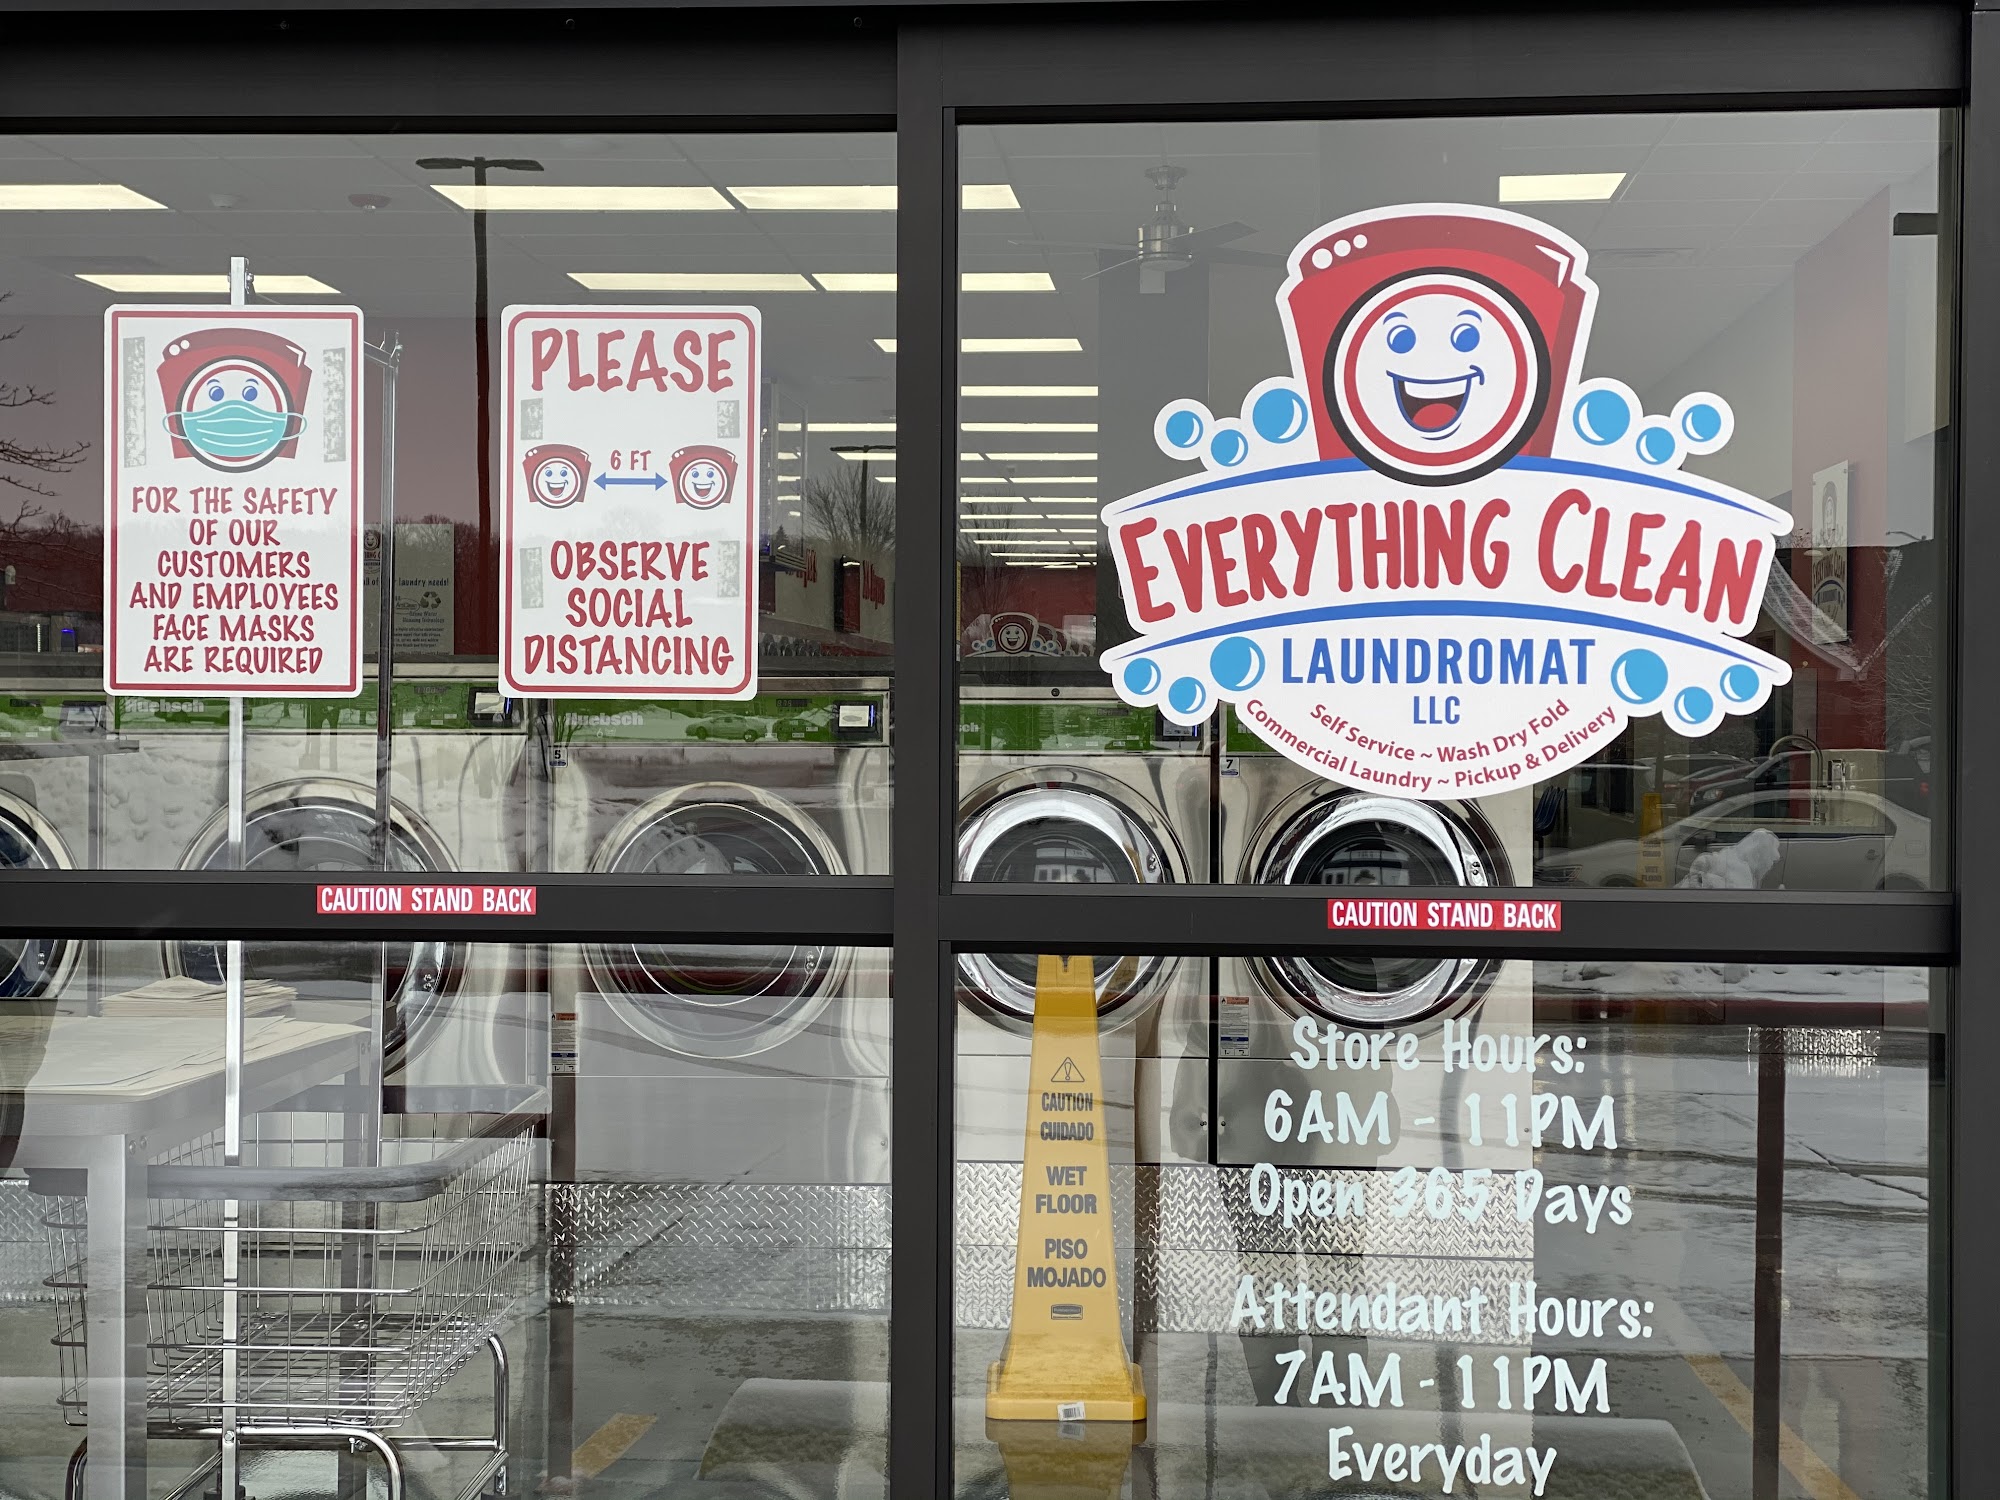 Everything Clean Laundromat